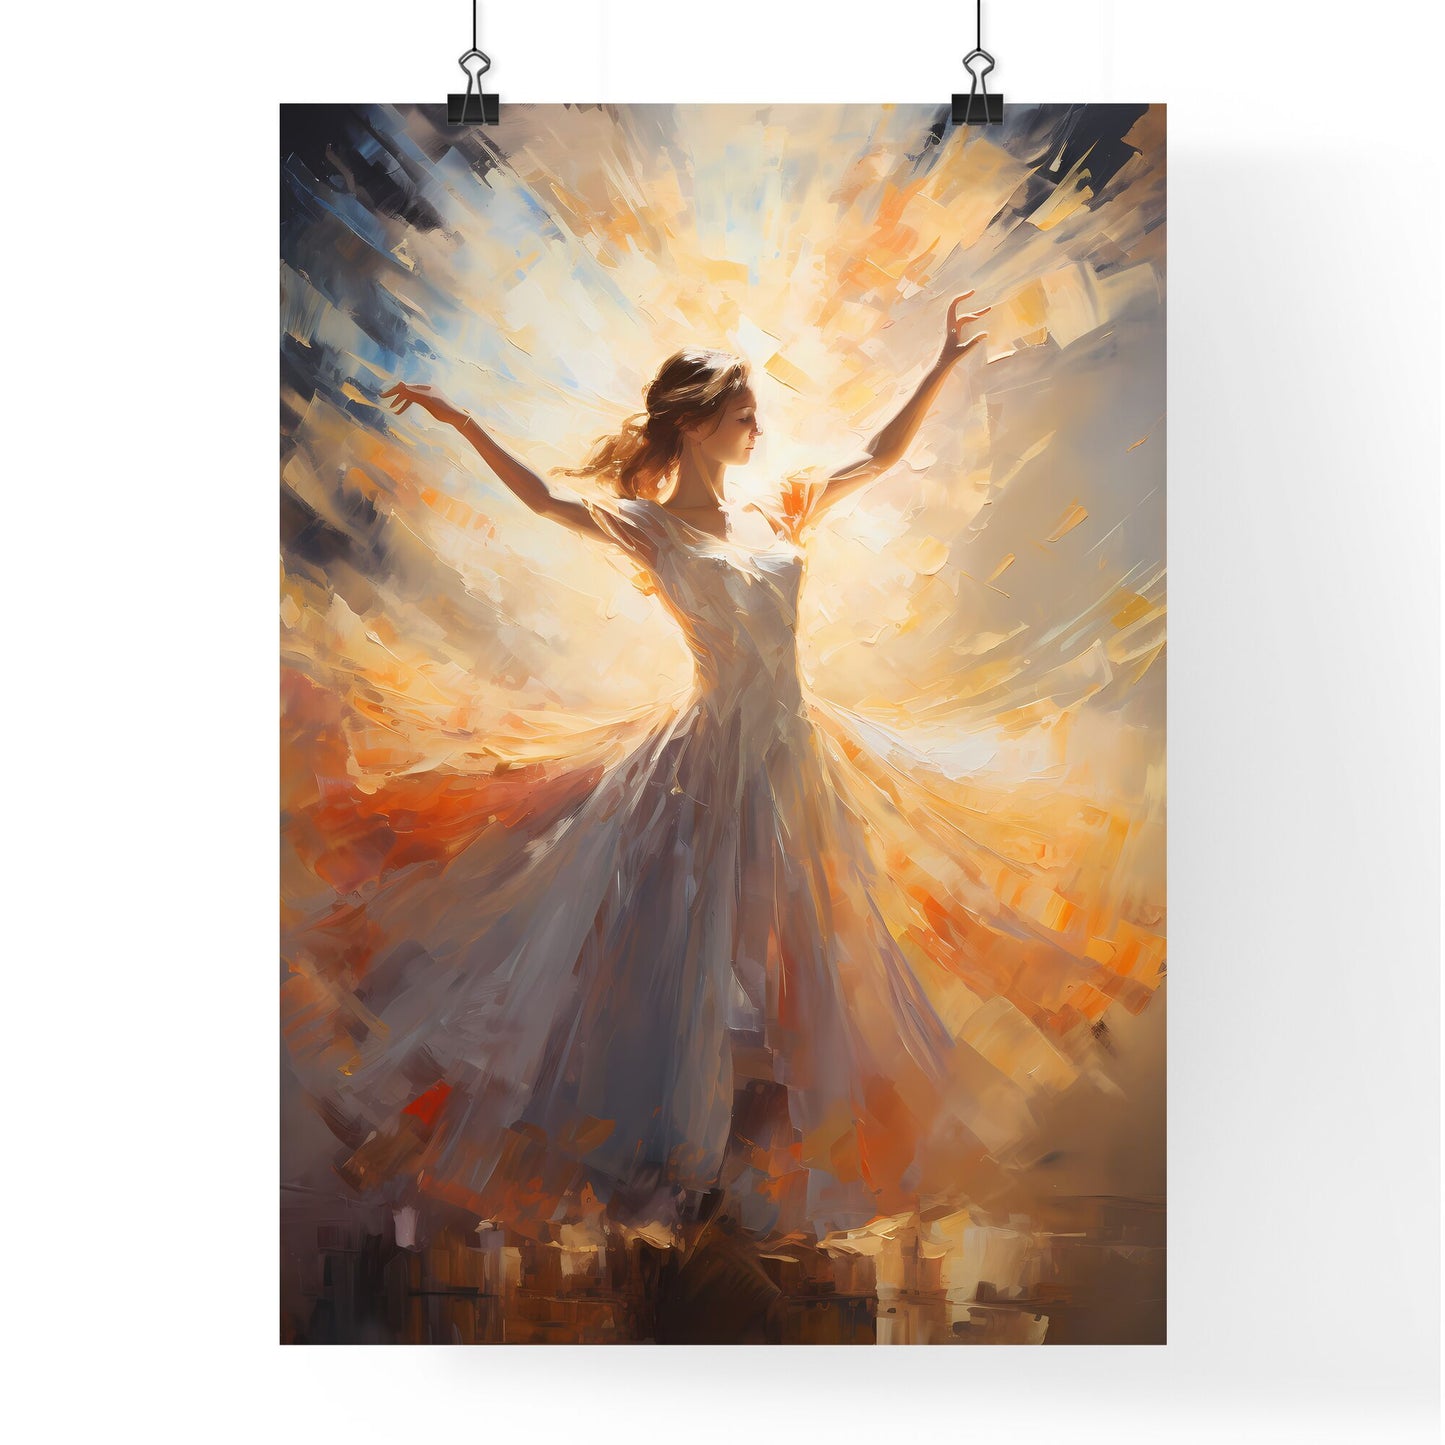 The Ballerina Soaring Against The Coming Sun - A Woman In A White Dress With Her Arms Outstretched Default Title